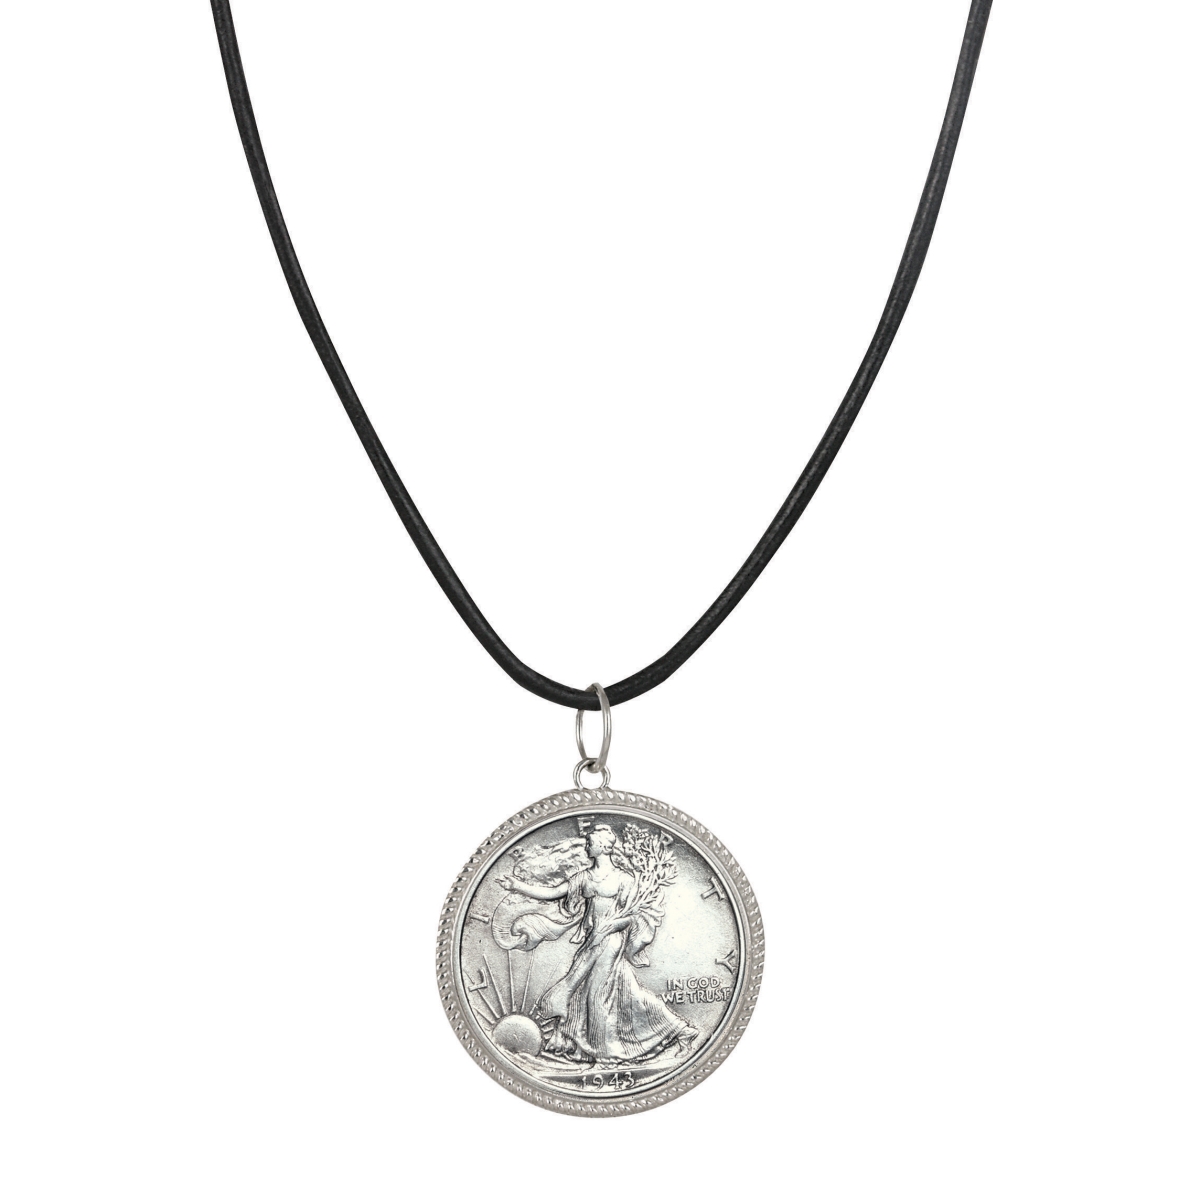 Picture of American Coin Treasures 16361 Walking Liberty Silver Half Dollar Pendant with Leather Cord for Men